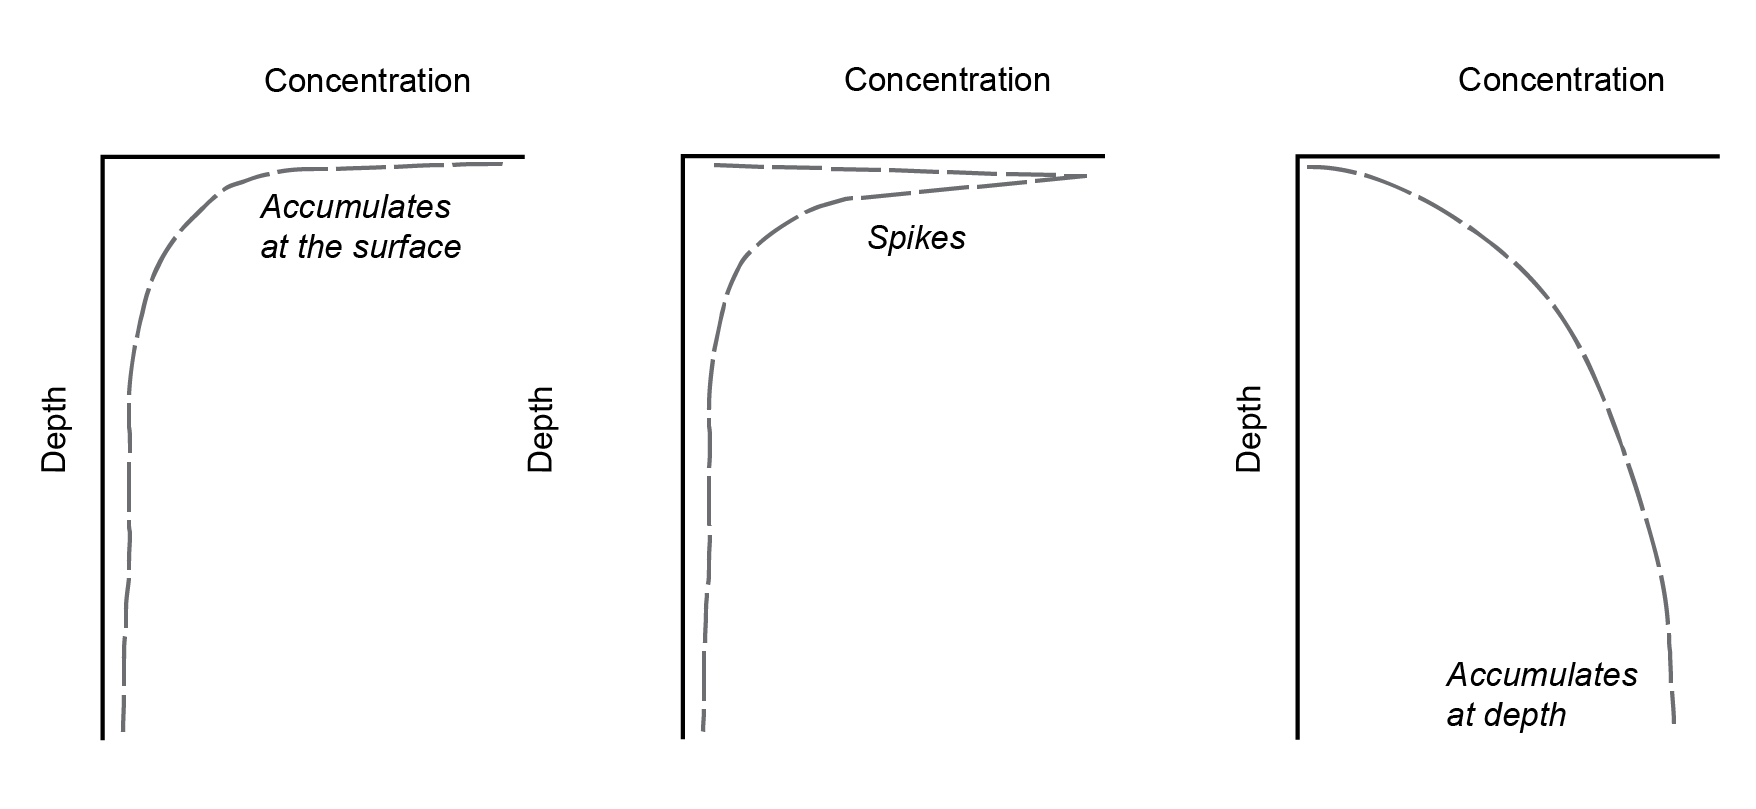 Examples of how the concentration profiles develop after initialisation. Left: the variable accumulates at the surface. Centre: a concentration spike develops. Right: the variable accumulates in the deep sediment.  